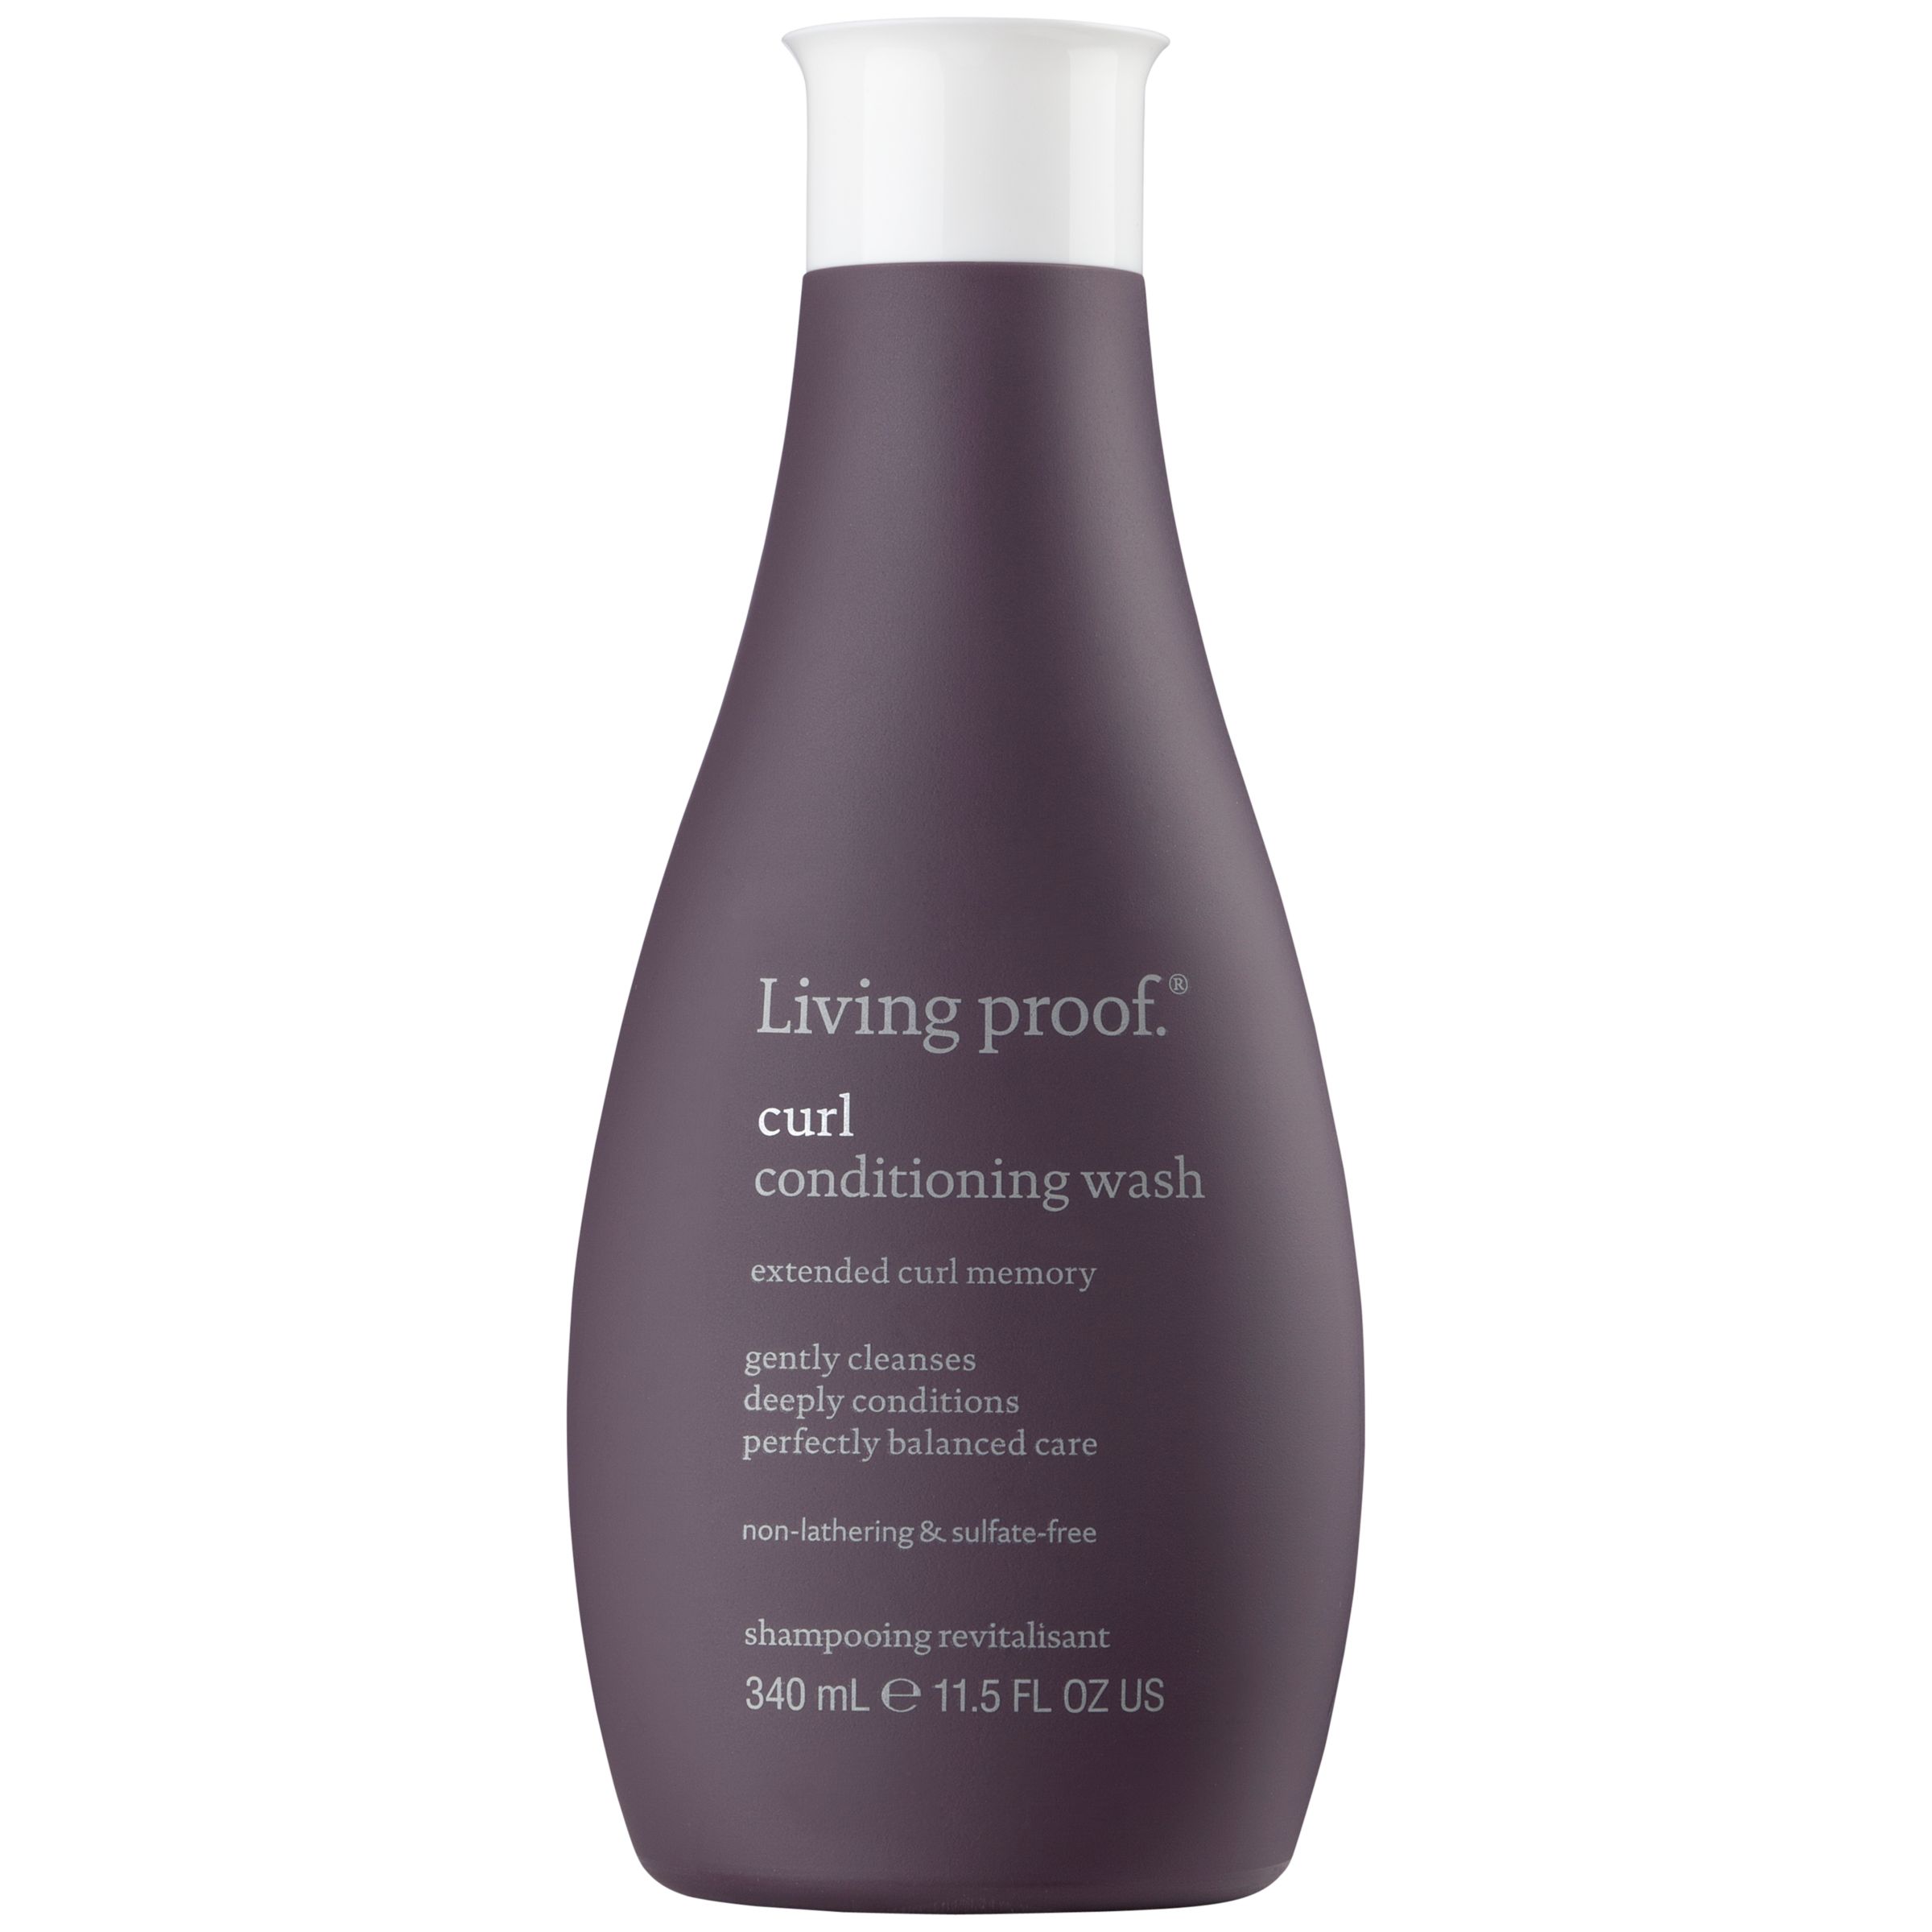 Living Proof Curl Conditioning Wash, 340ml